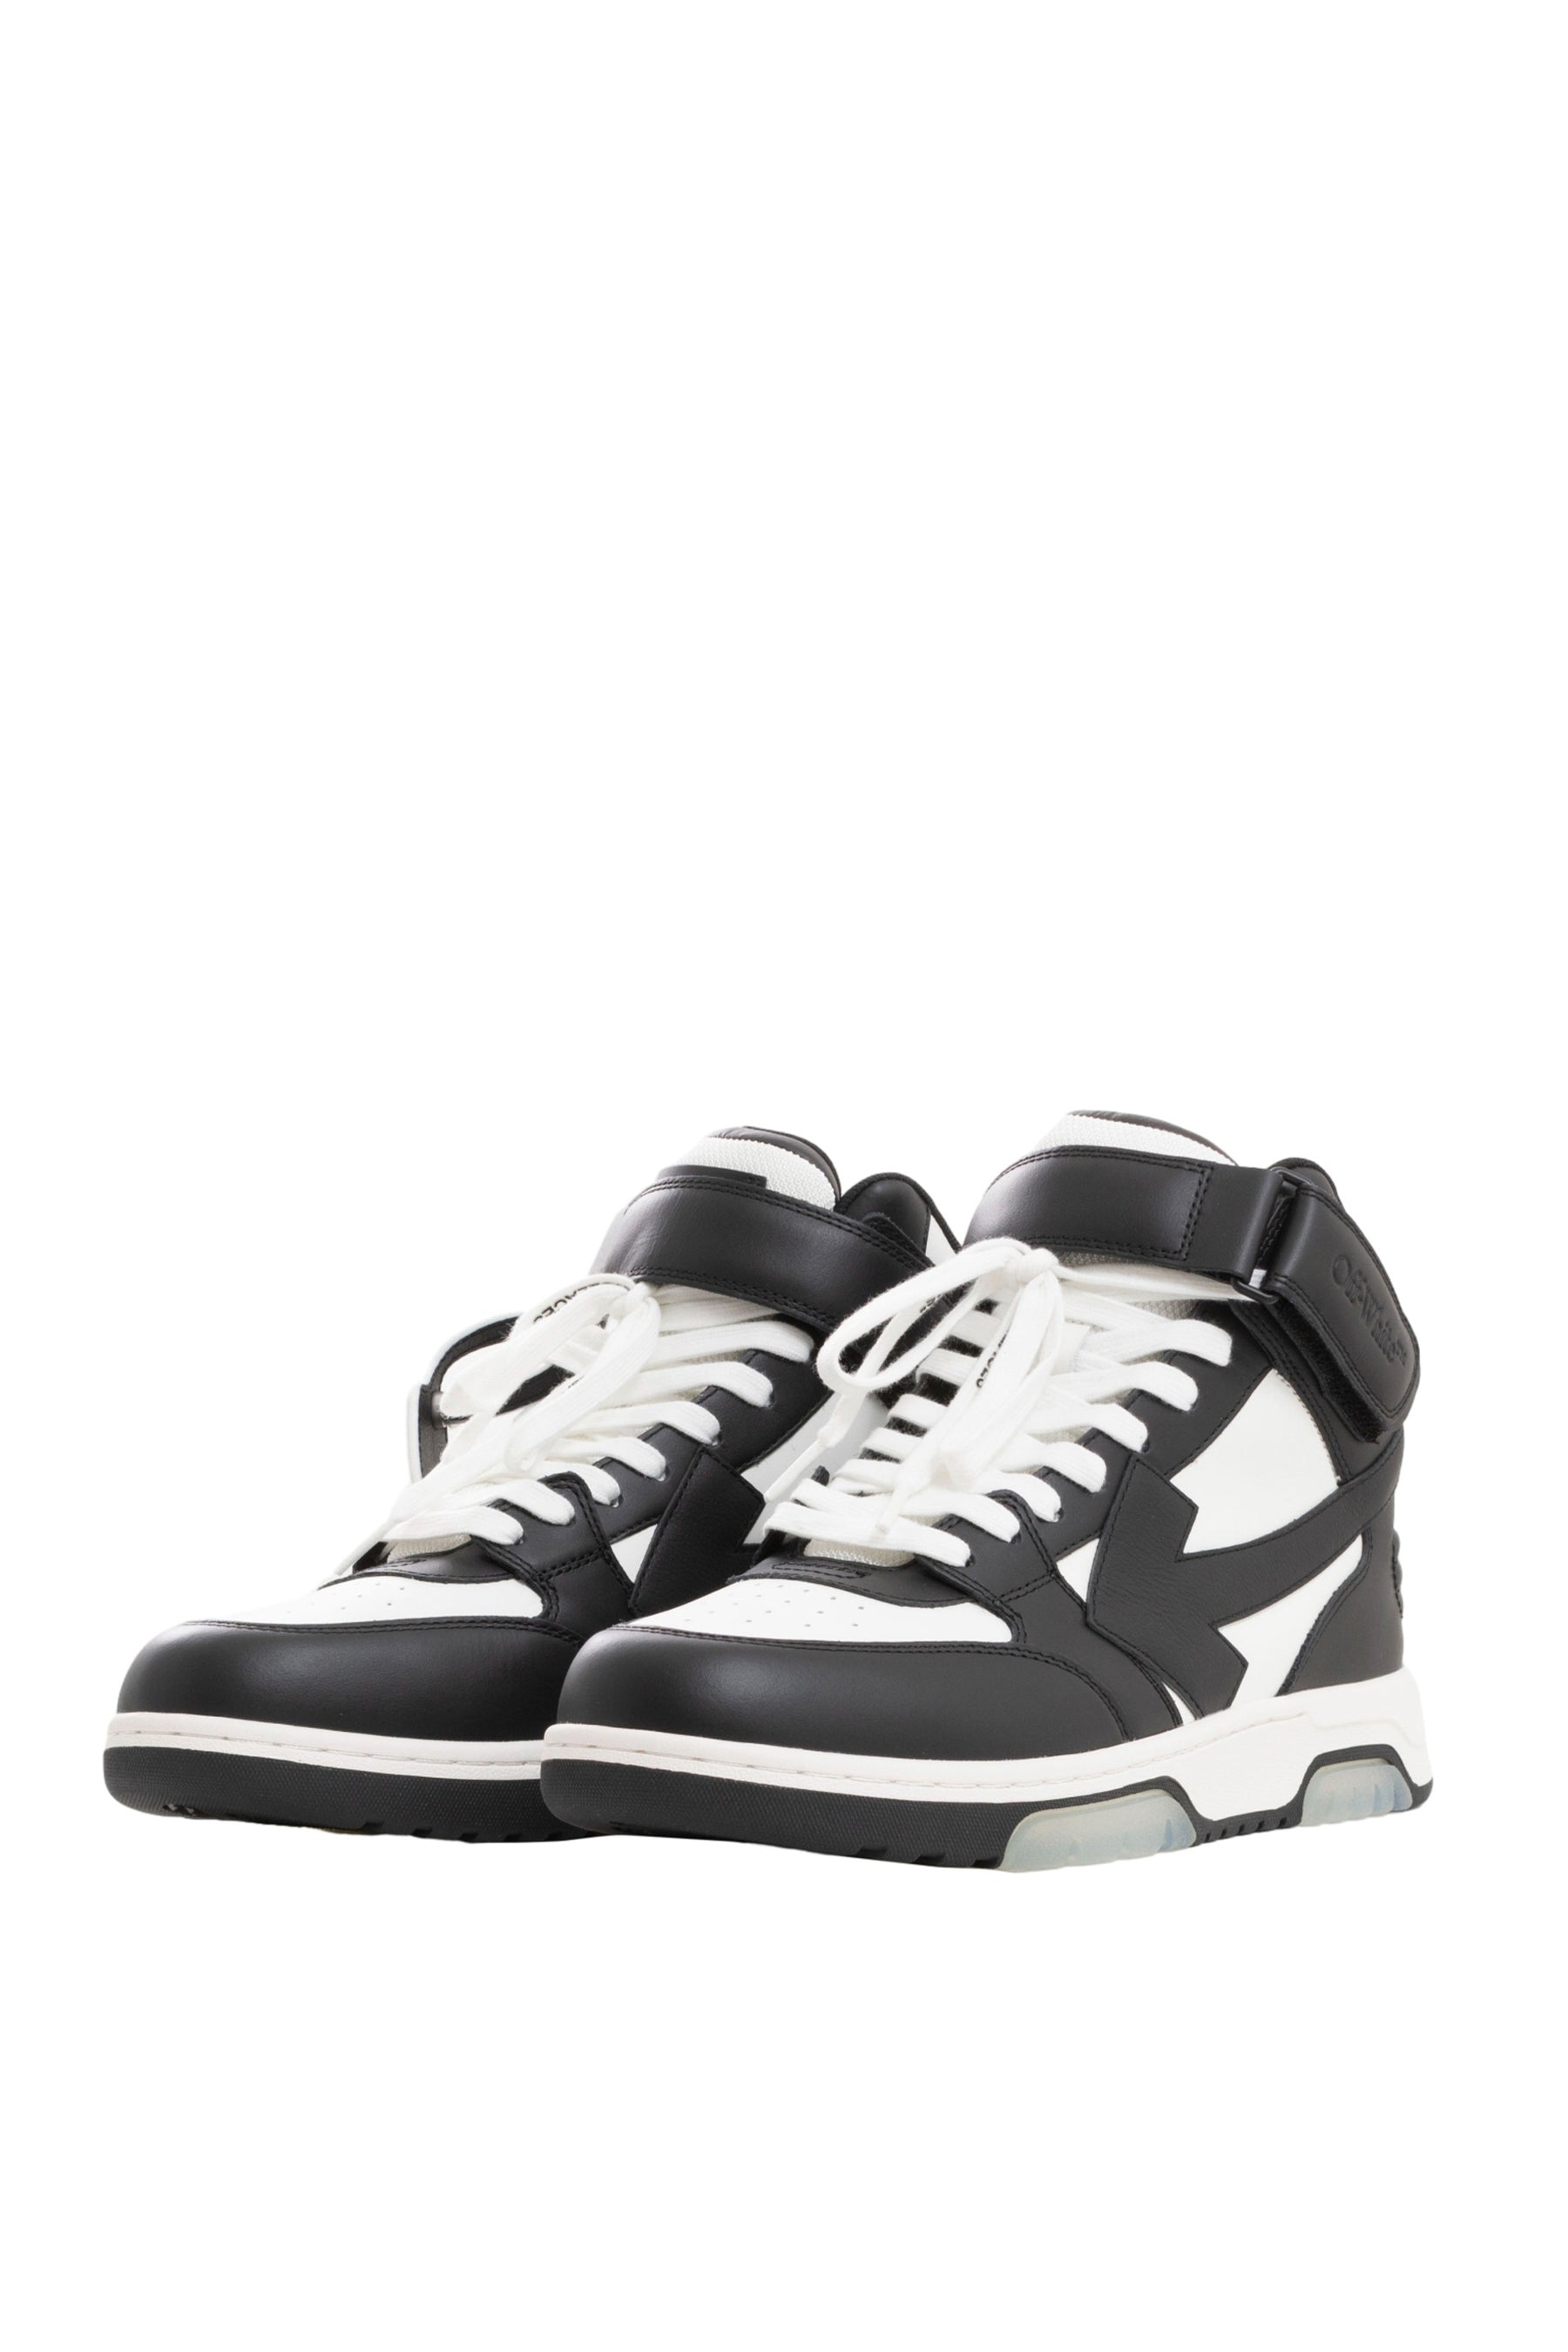 OUT OF OFFICE MID TOP LEATHER / WHT BLK